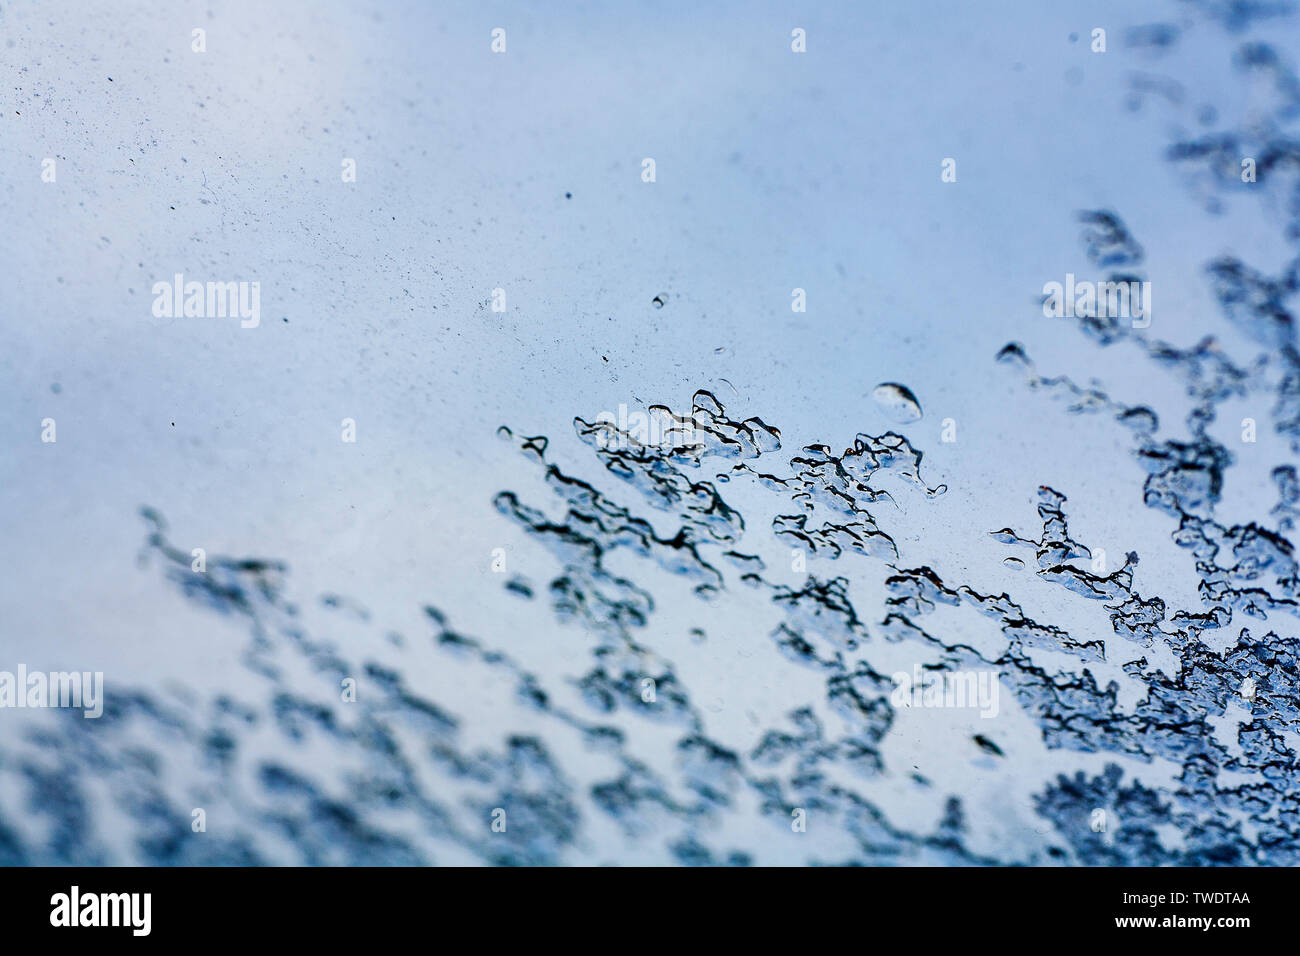 Ice on glass abstract macro background fine art in high quality prints products prints Stock Photo